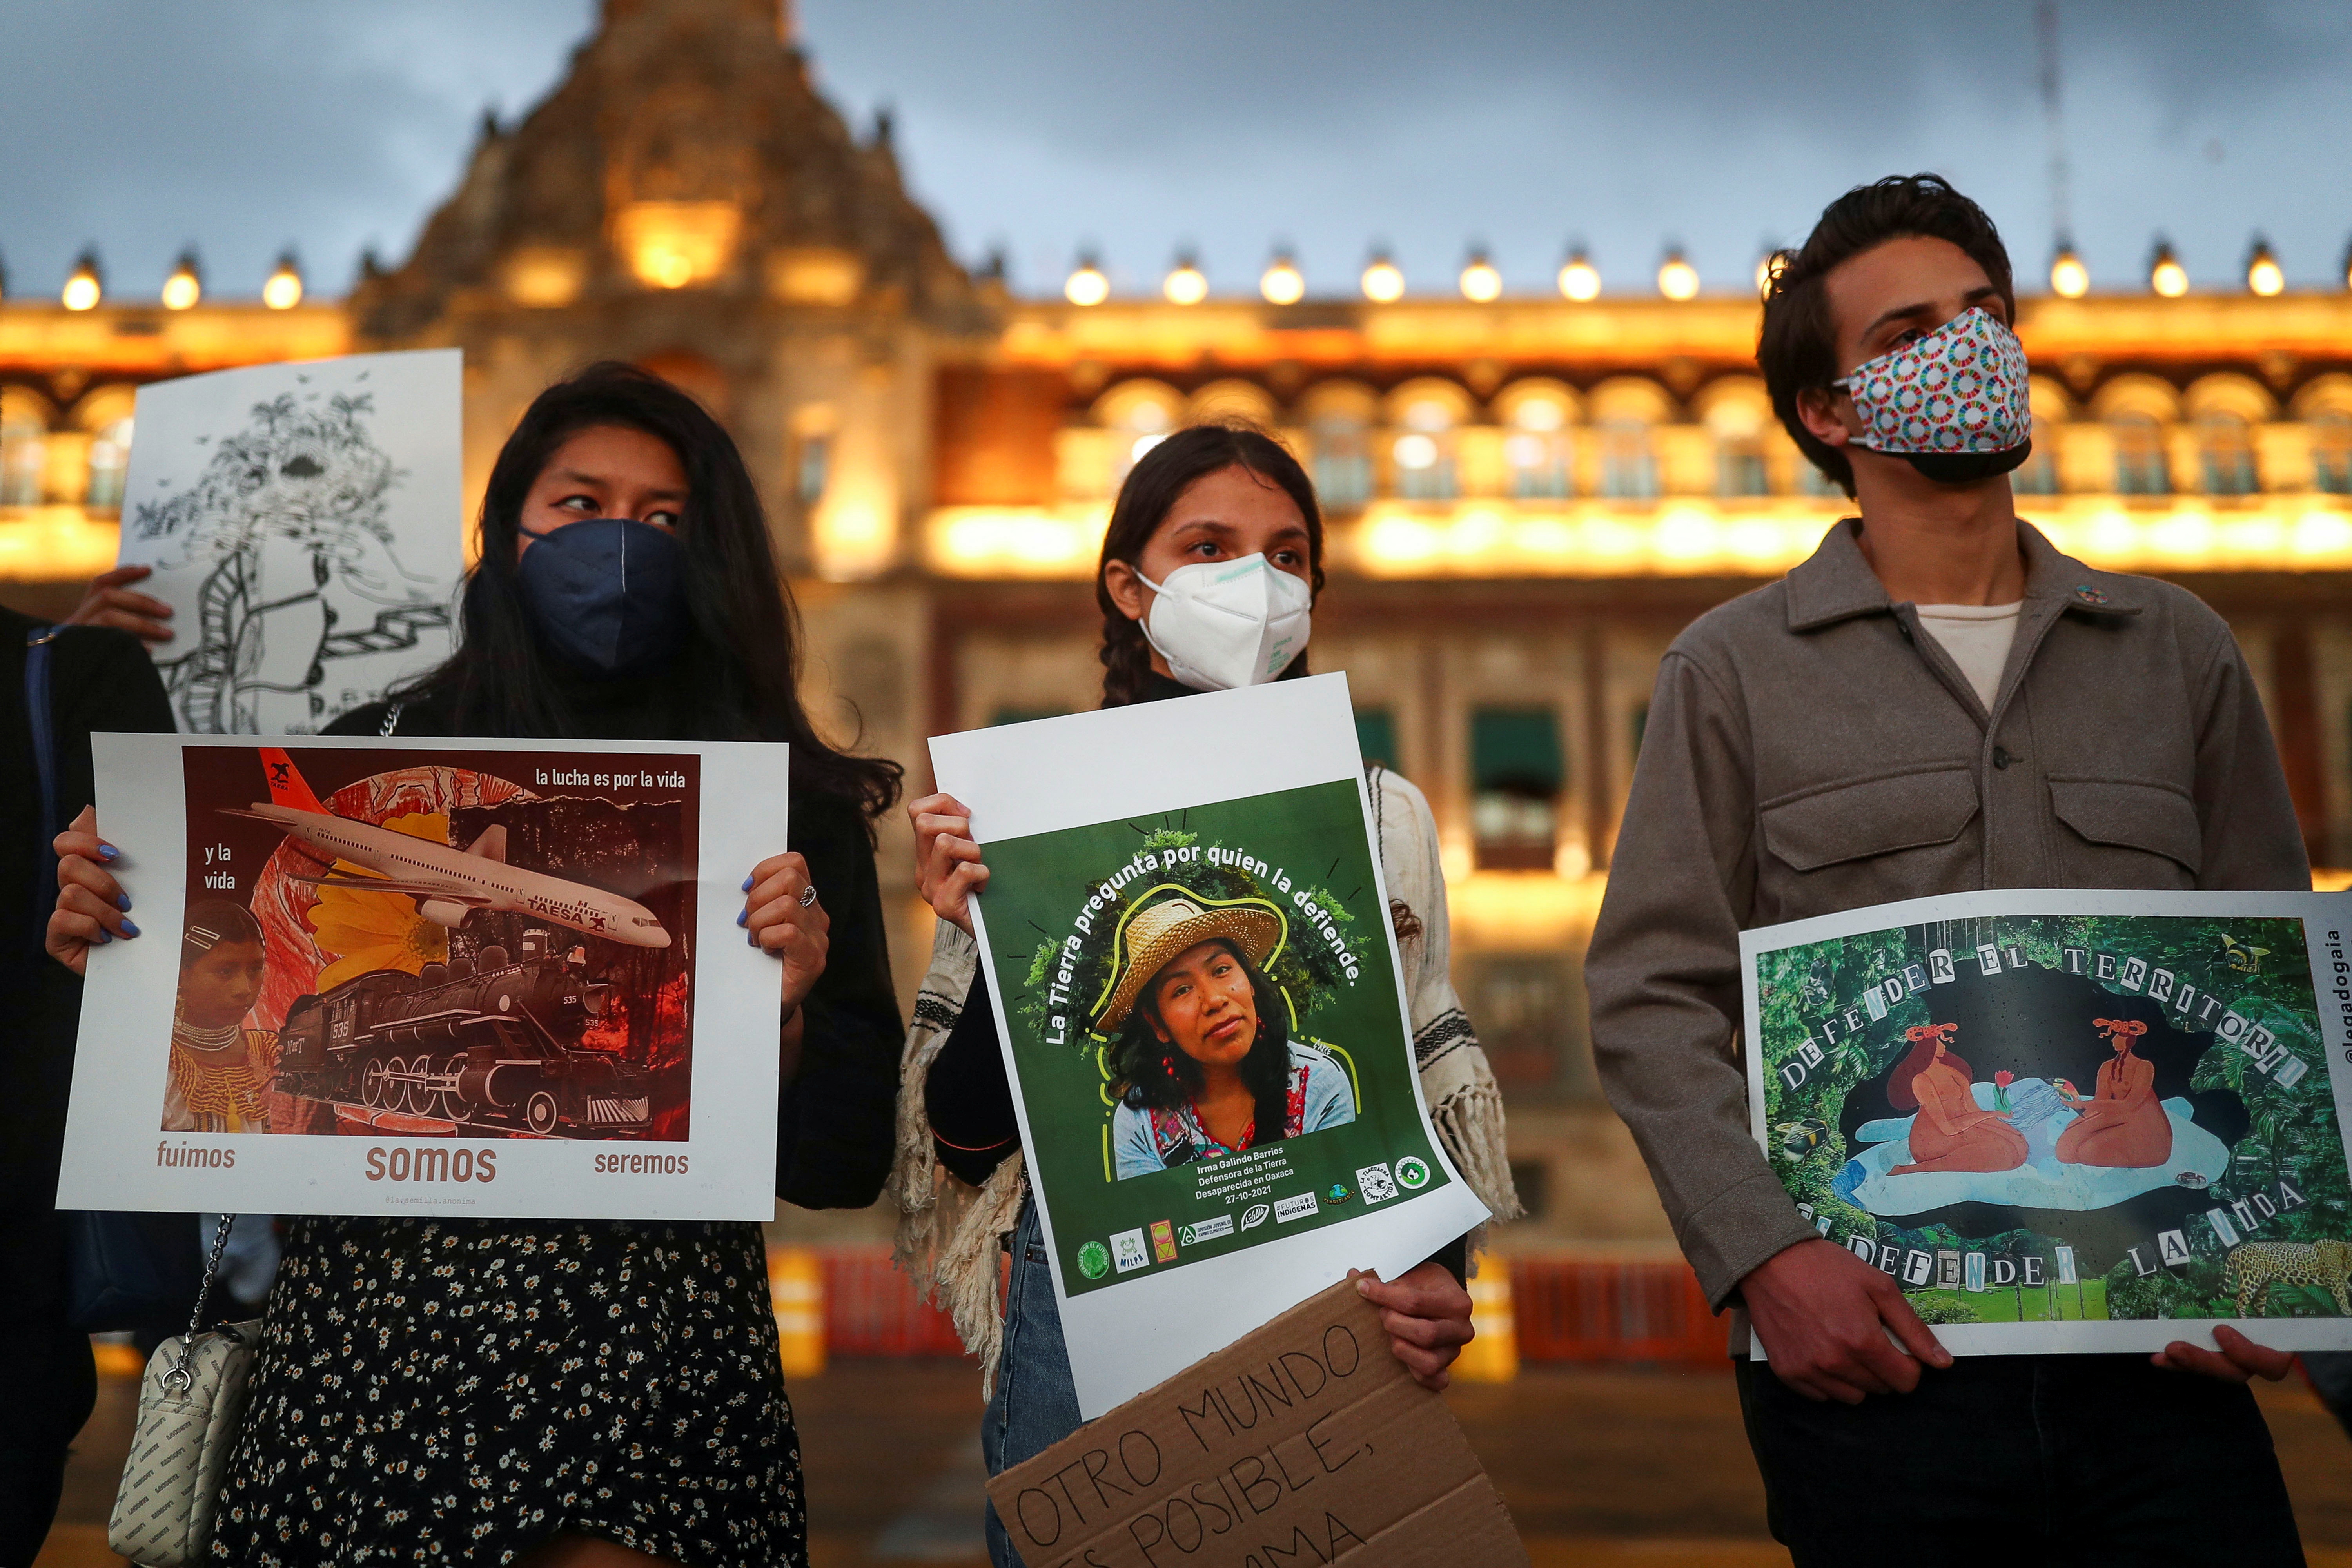 Mexico is world's deadliest spot for environmental activists